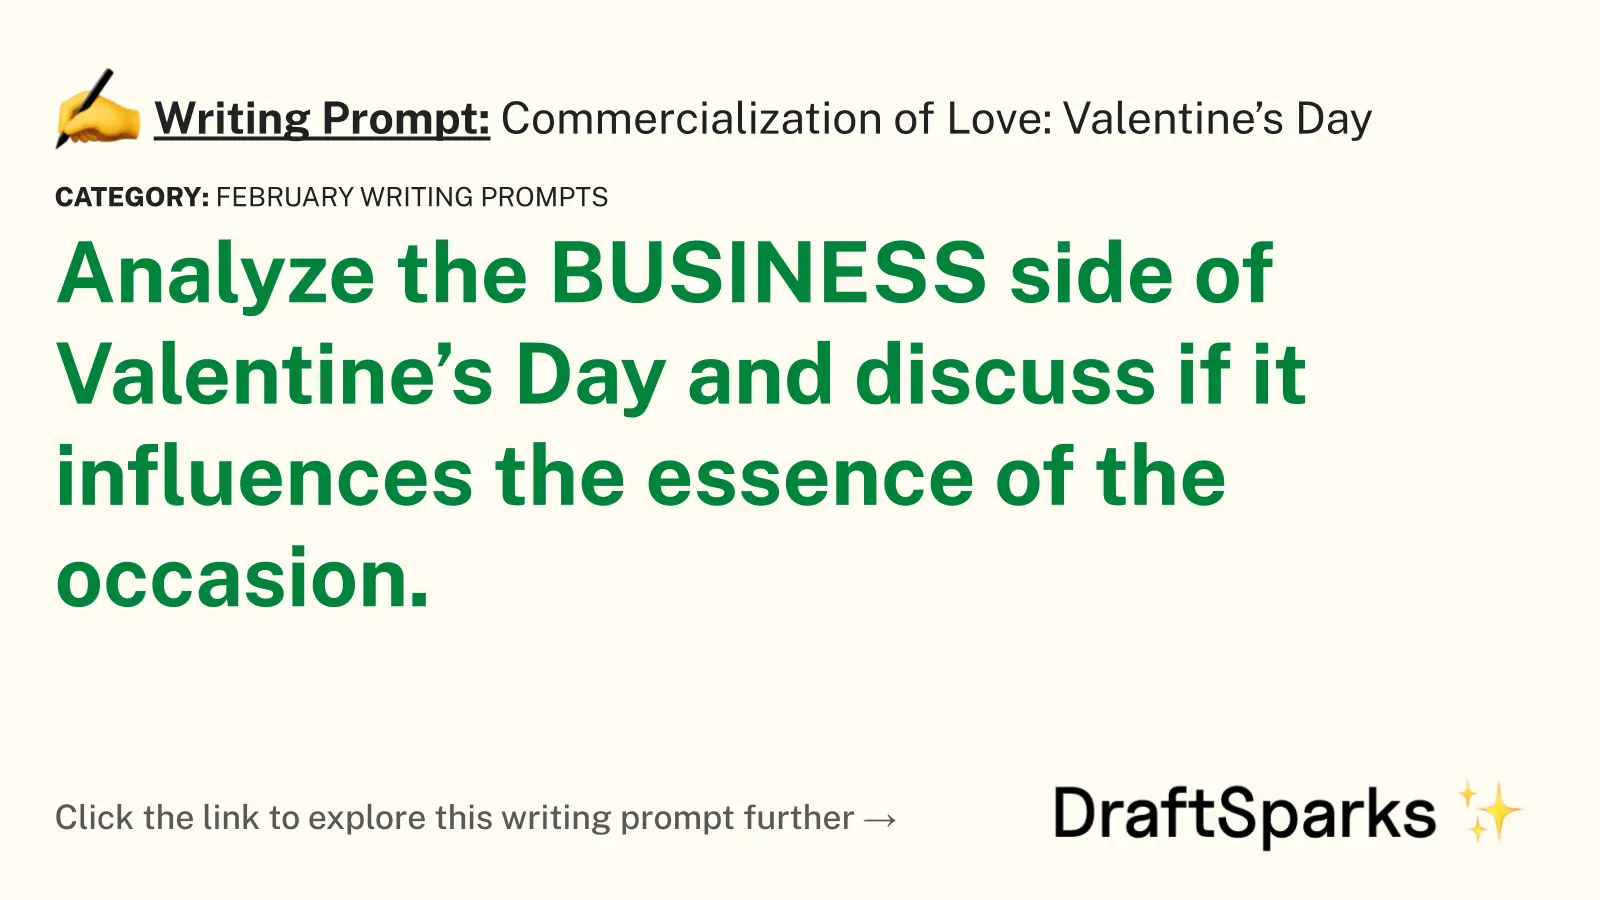 Commercialization of Love: Valentine’s Day